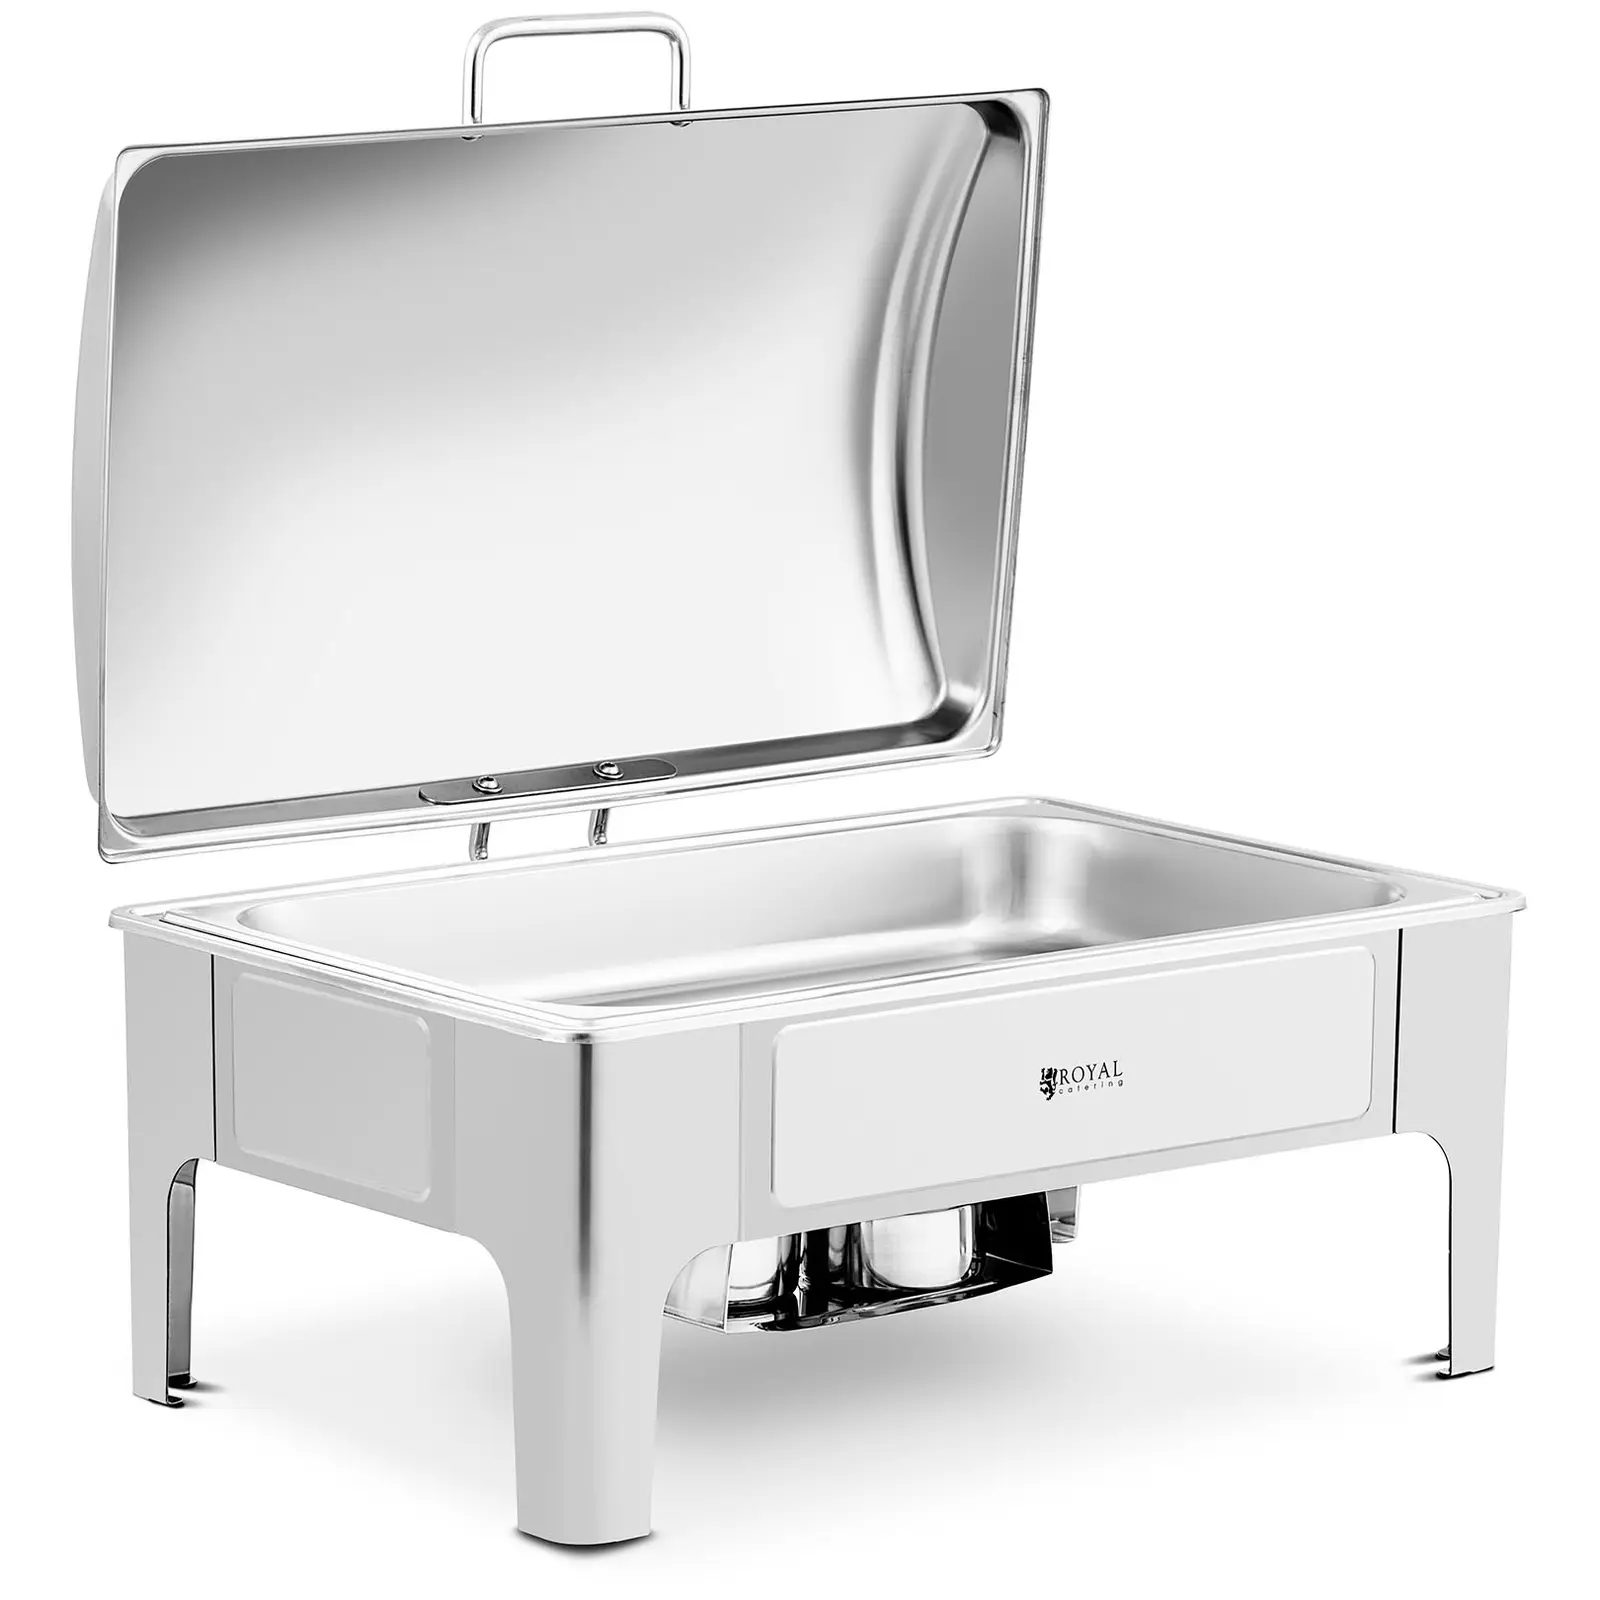 Chafing dish GN 1/1 8